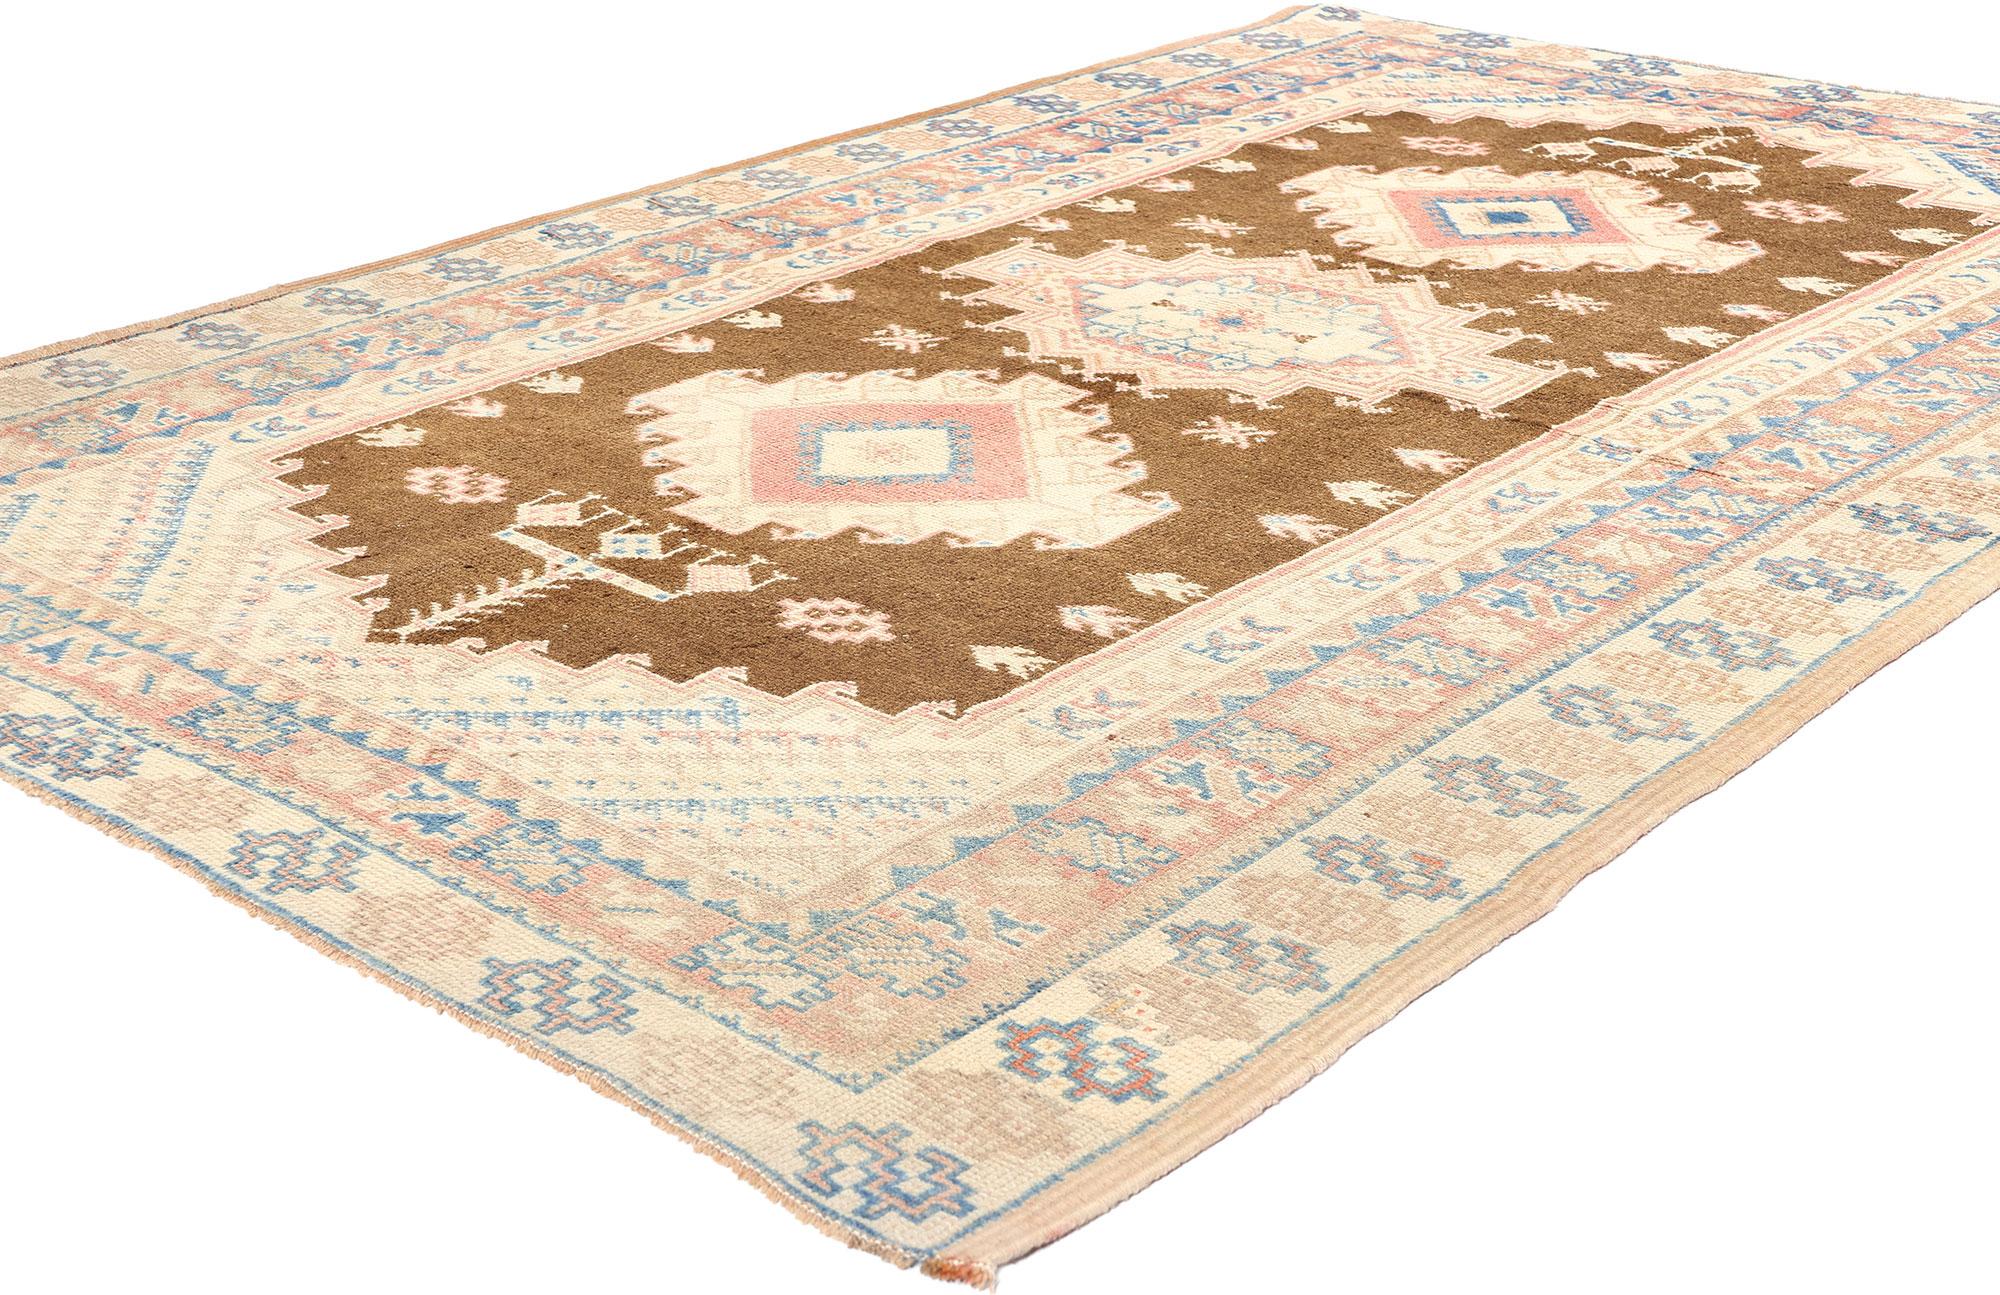 53617 Vintage Turkish Oushak Rug, 05'01 x 07'07. Replete with intricate details and boasting a bold tribal design softened by gentle hues, this hand-knotted wool vintage Turkish Oushak rug is a mesmerizing testament to the artistry of weaving. The